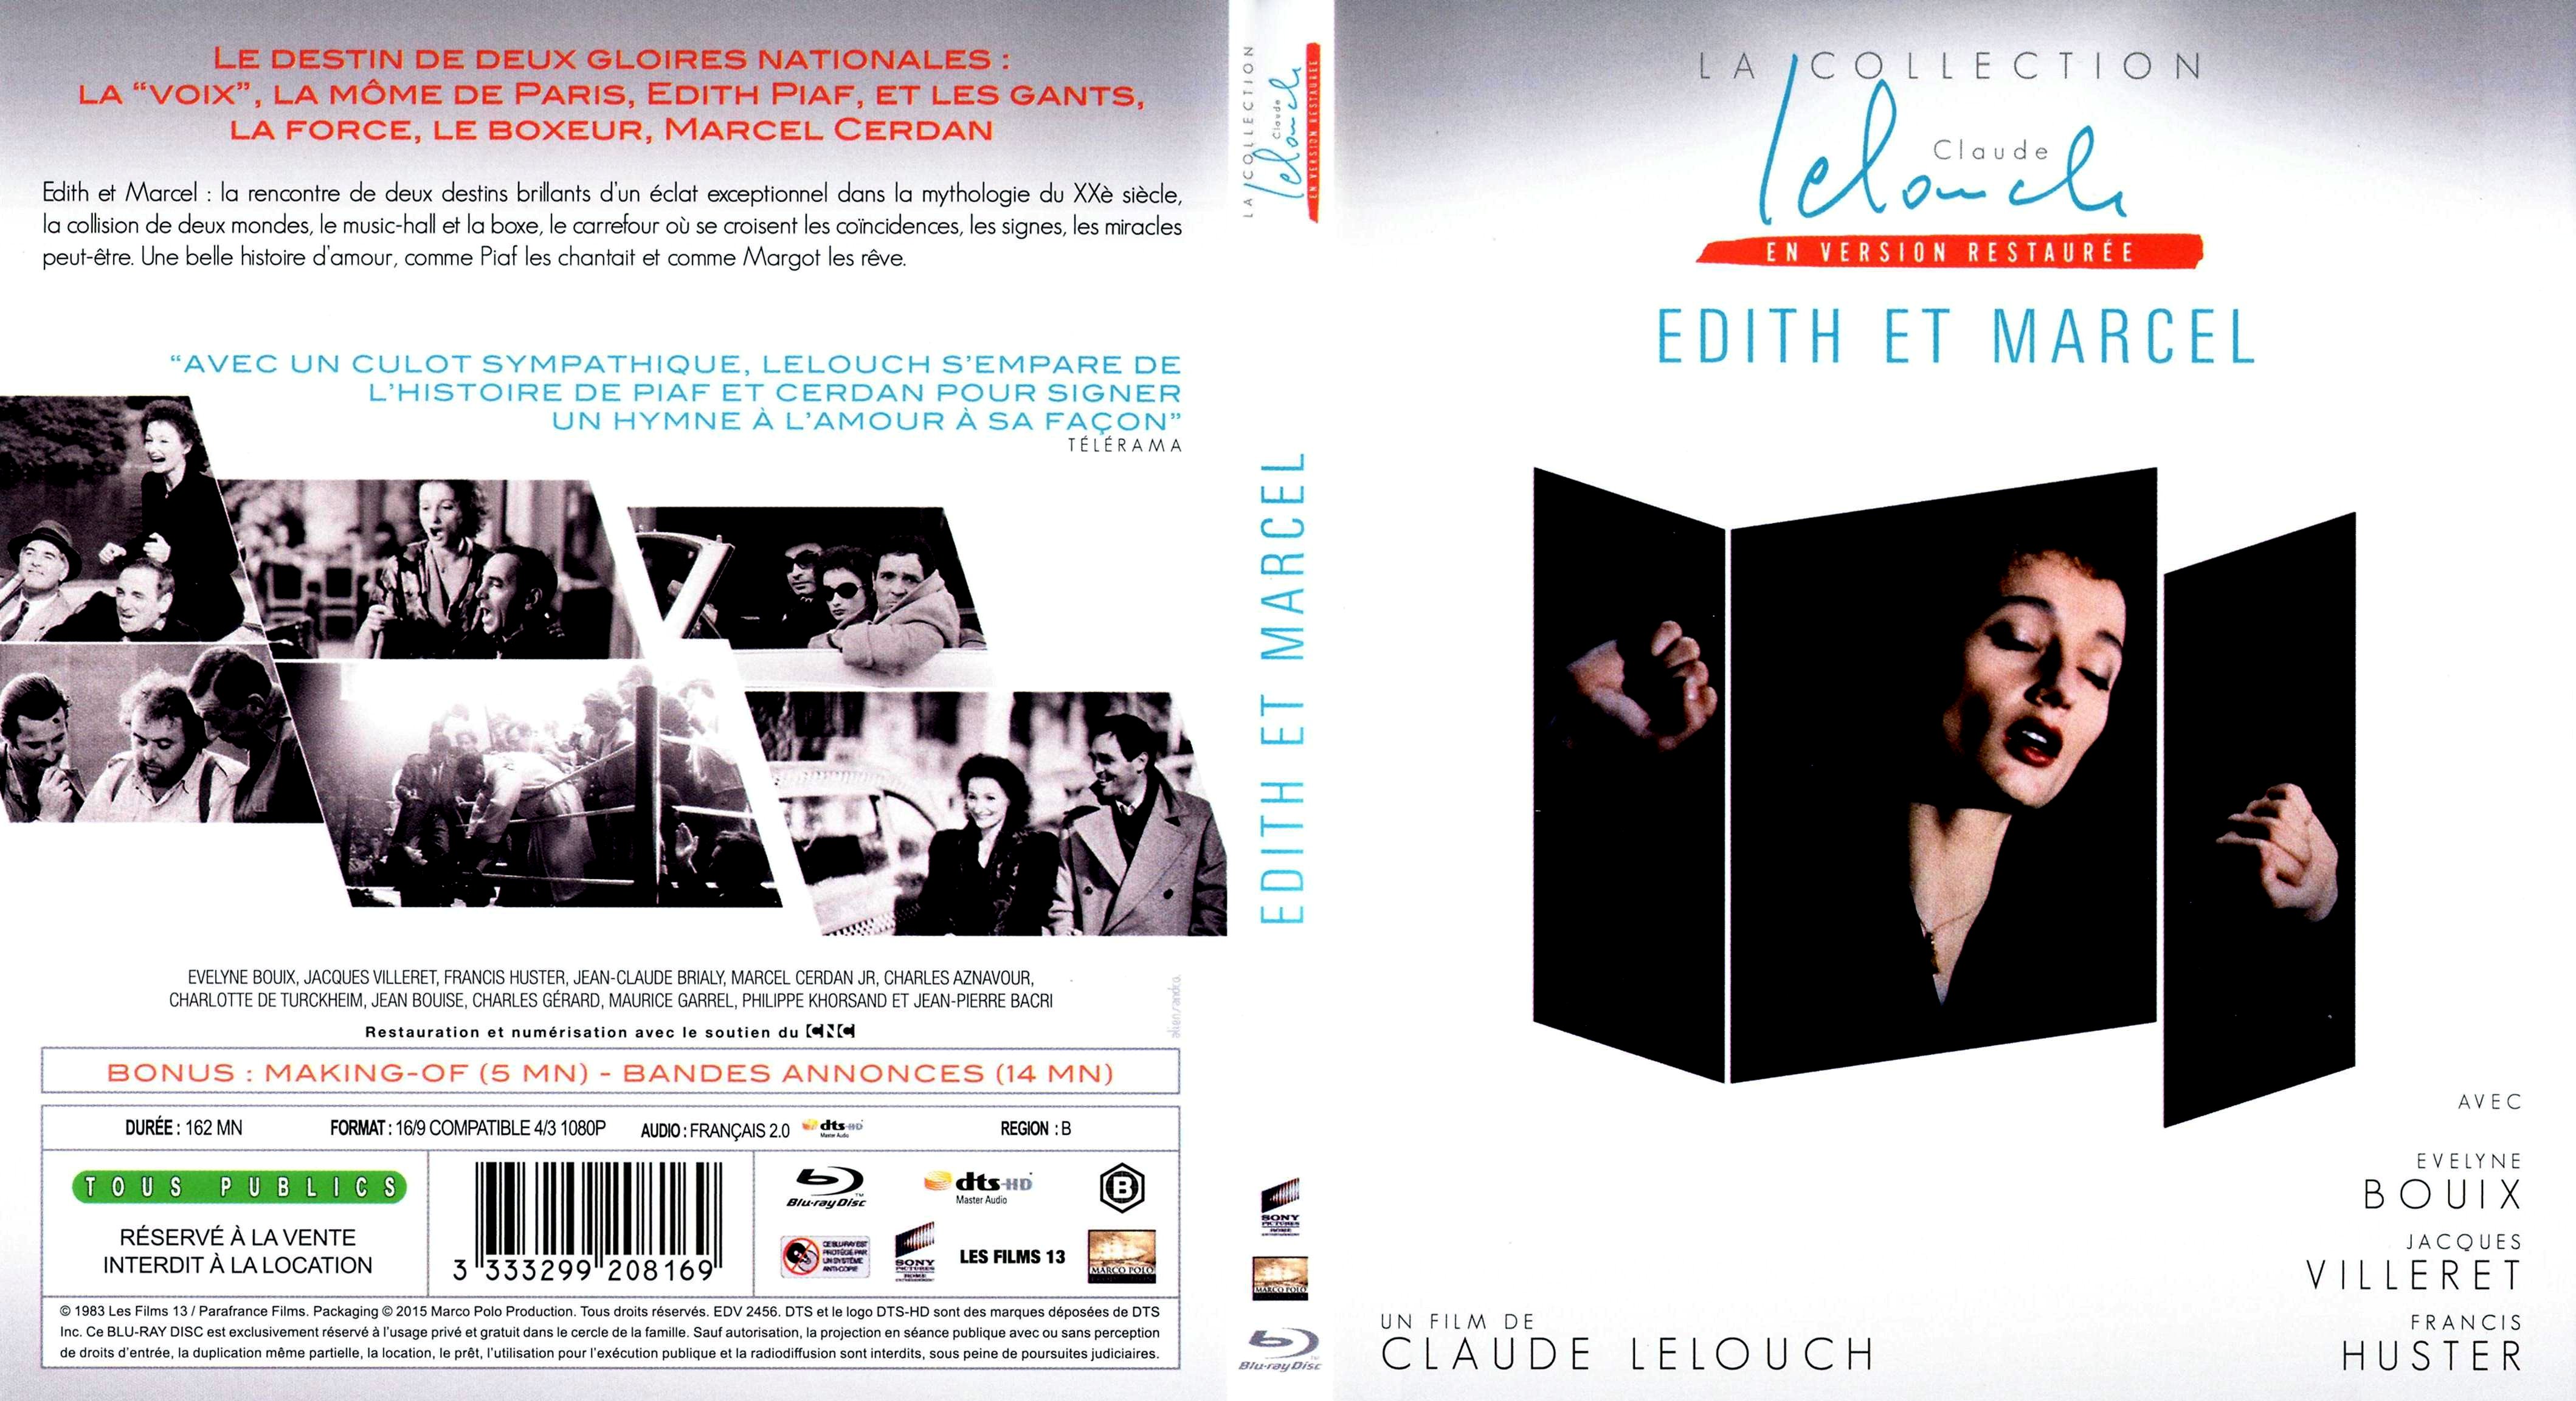 Jaquette DVD Edith et Marcel (BLU-RAY)